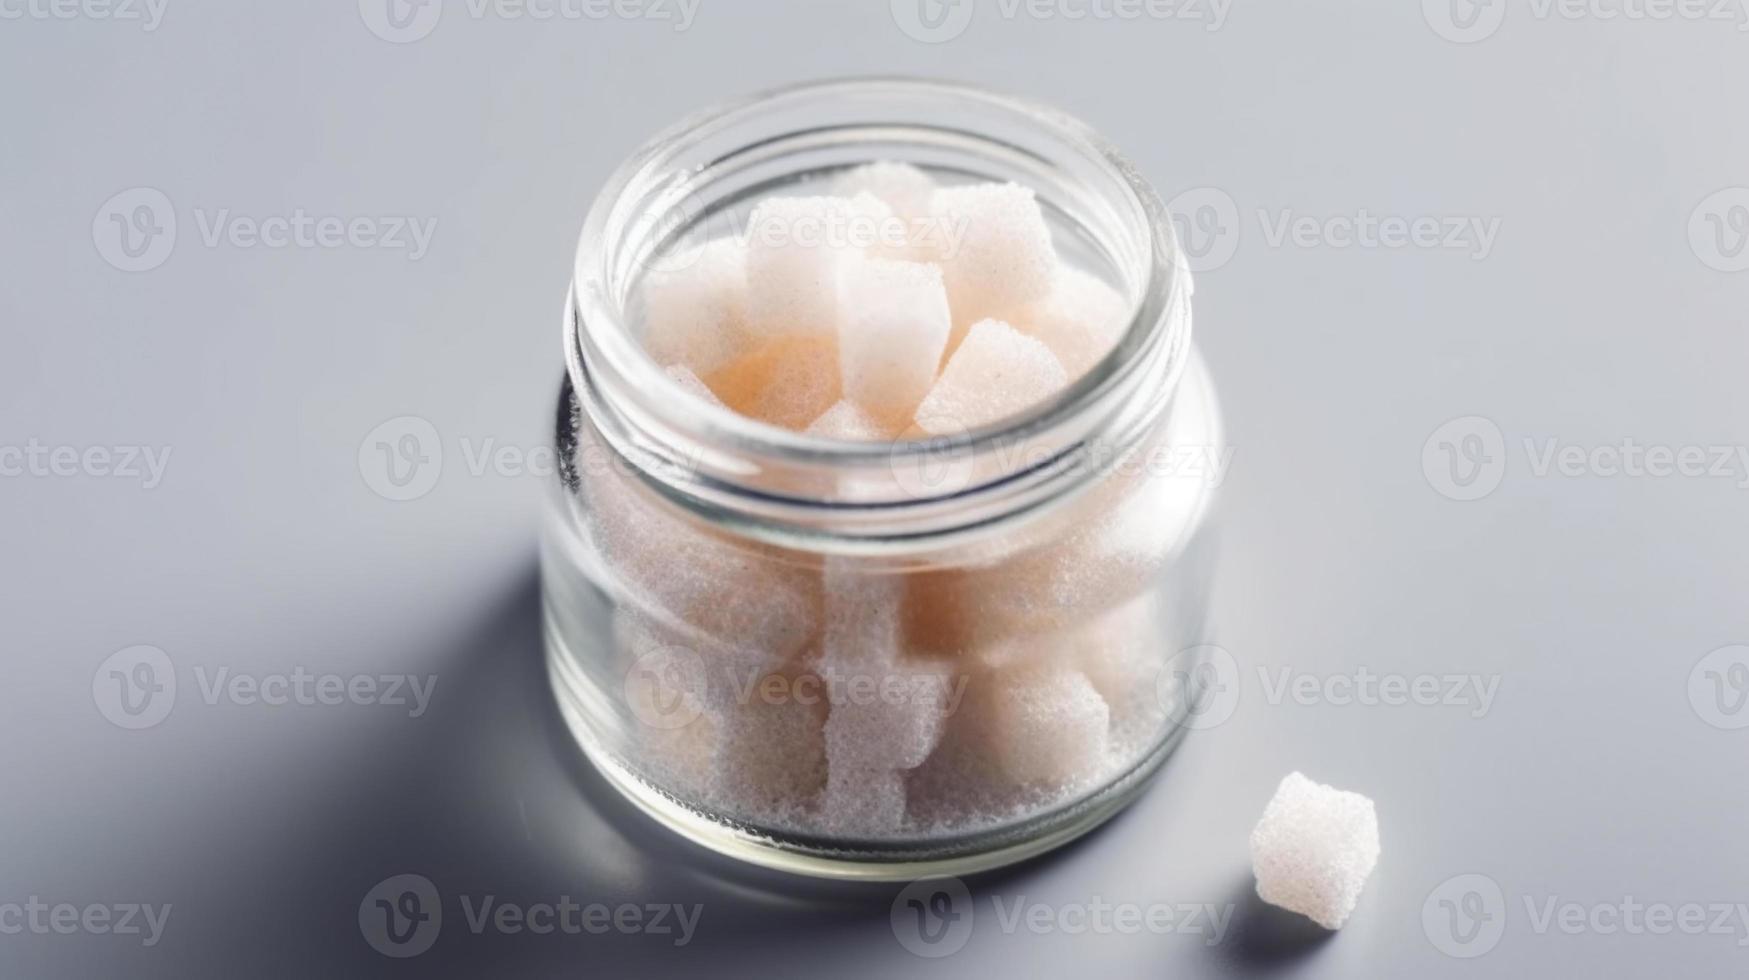 White sugar cube in a glass jar studio product shot photography presentation on white background. photo